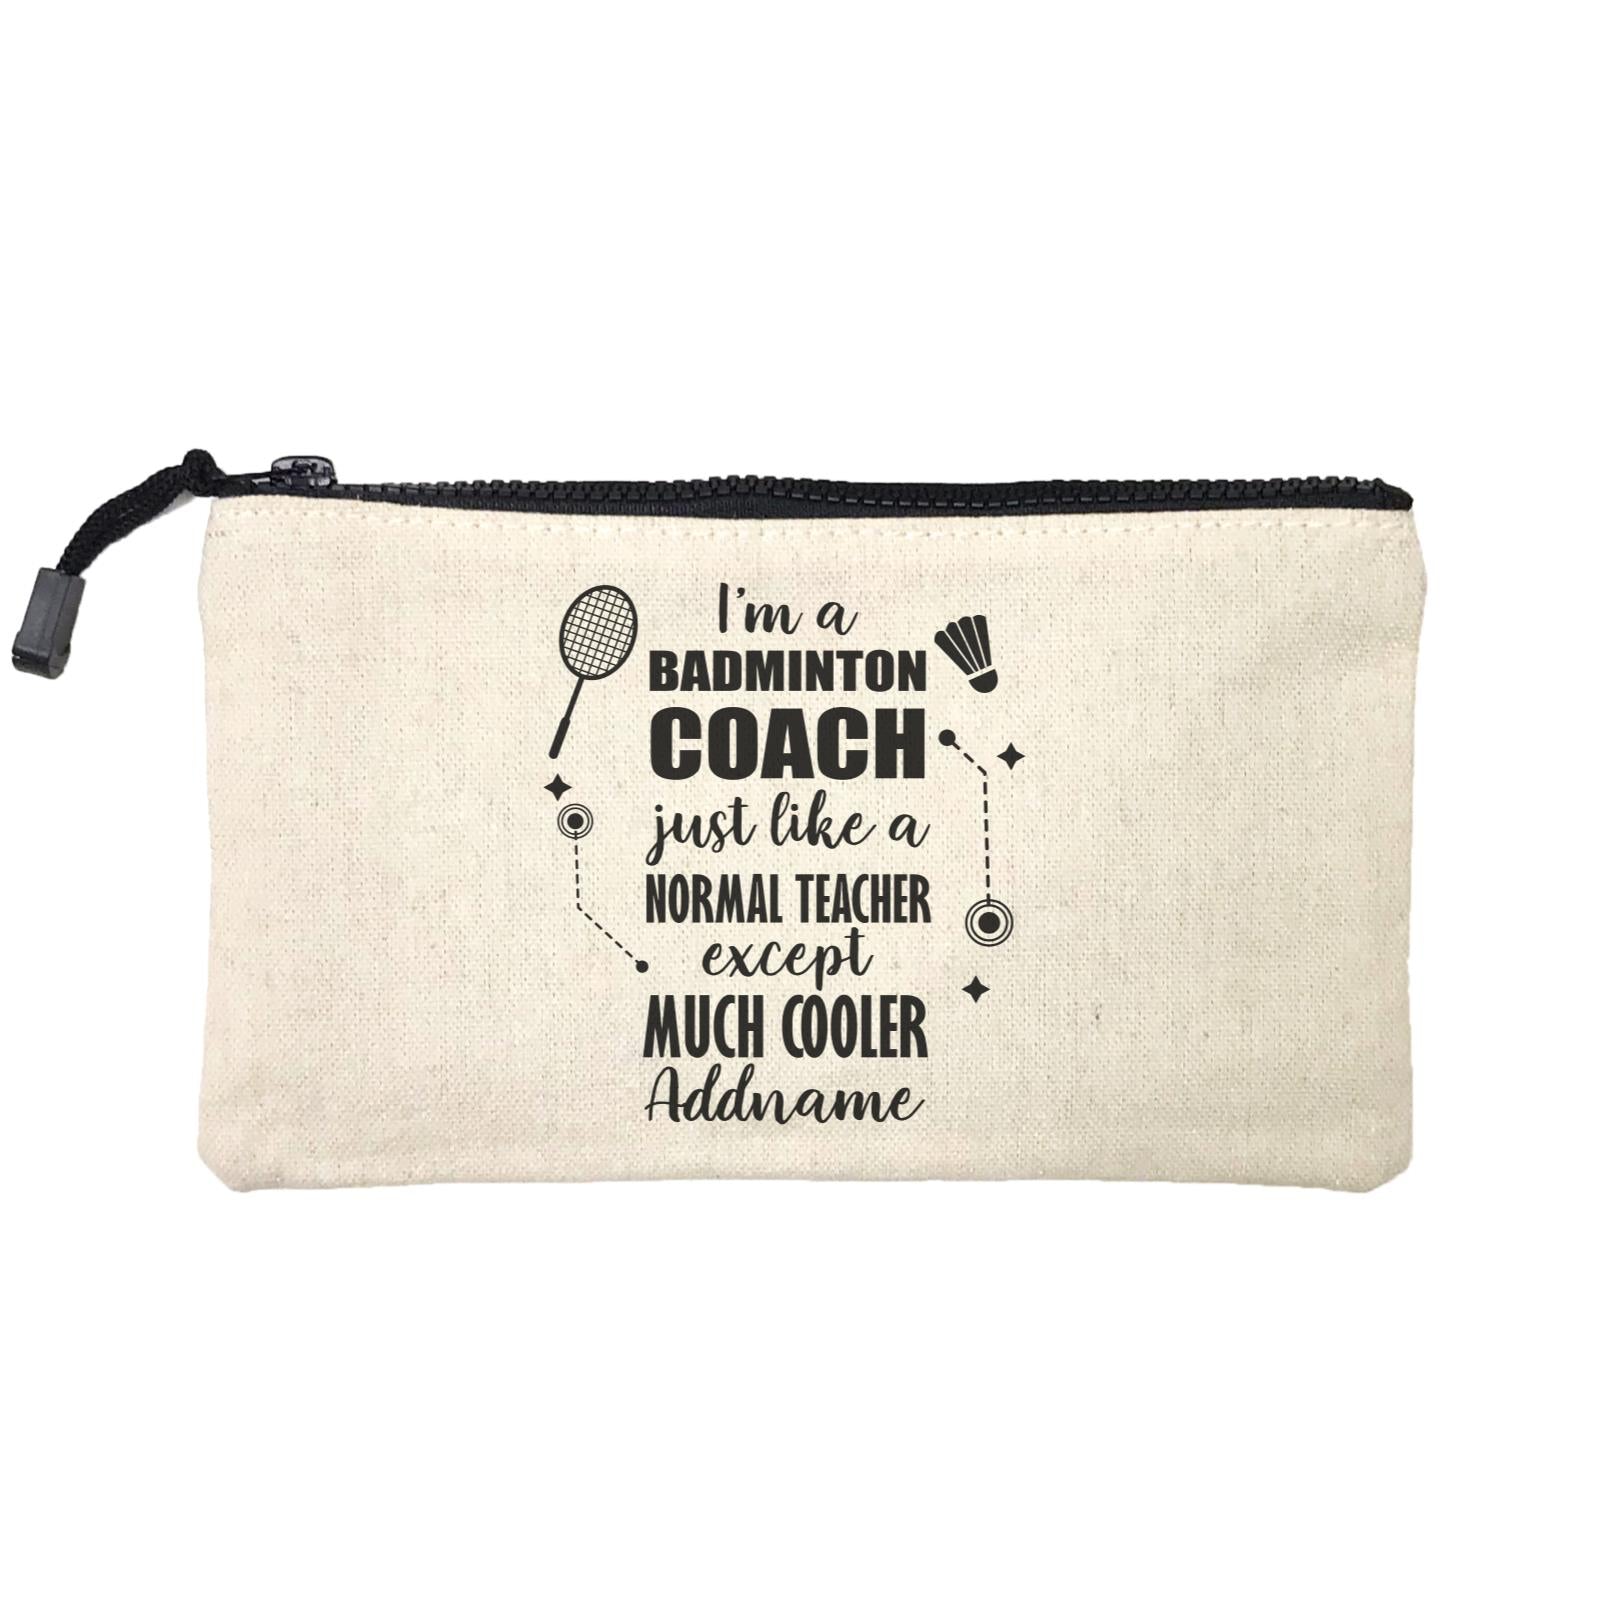 Subject Teachers I'm A Badminton Coach Addname Mini Accessories Stationery Pouch